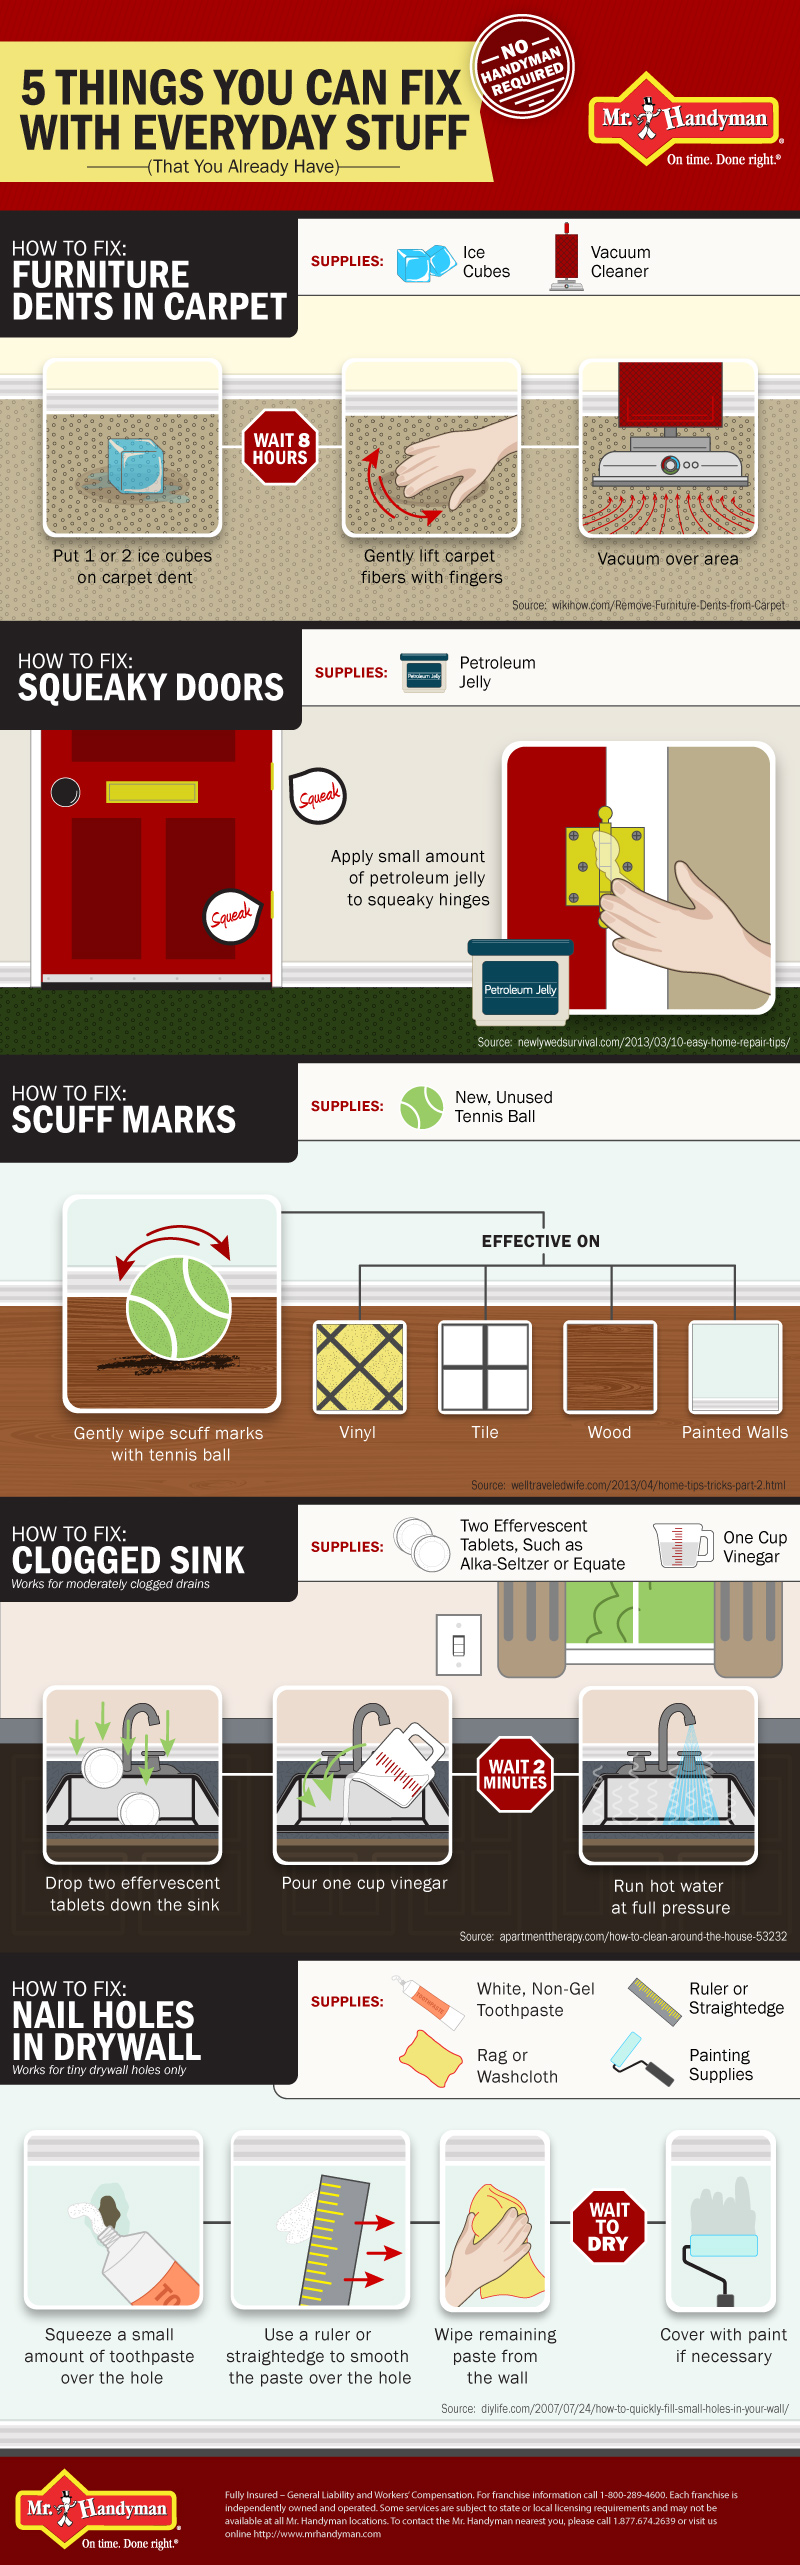 5 Things You Can Fix Without a Handyman